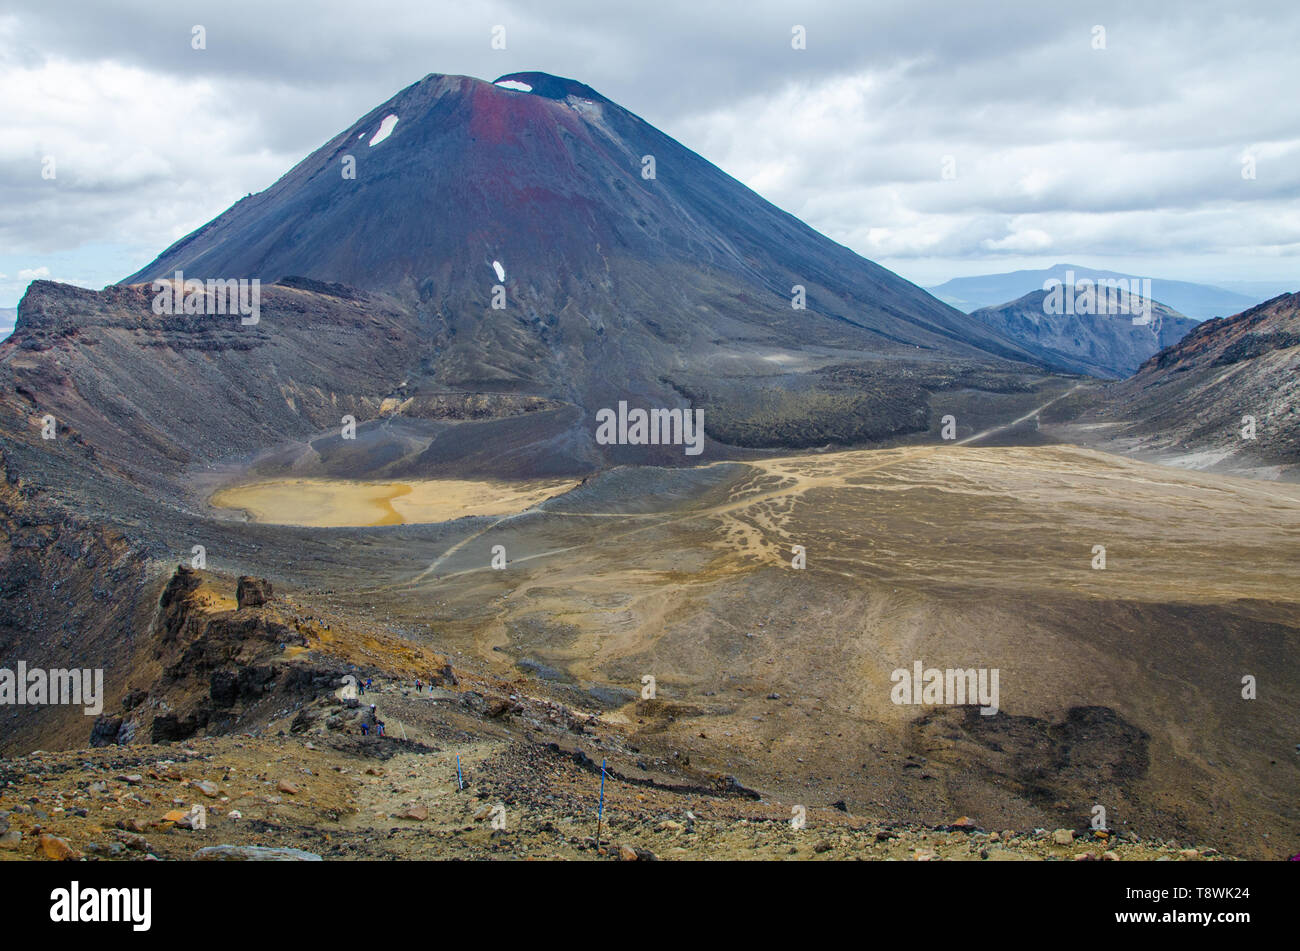 View of Mount Ngauruhoe - Mount Doom from Tongariro Alpine Crossing hike with clouds above. Stock Photo